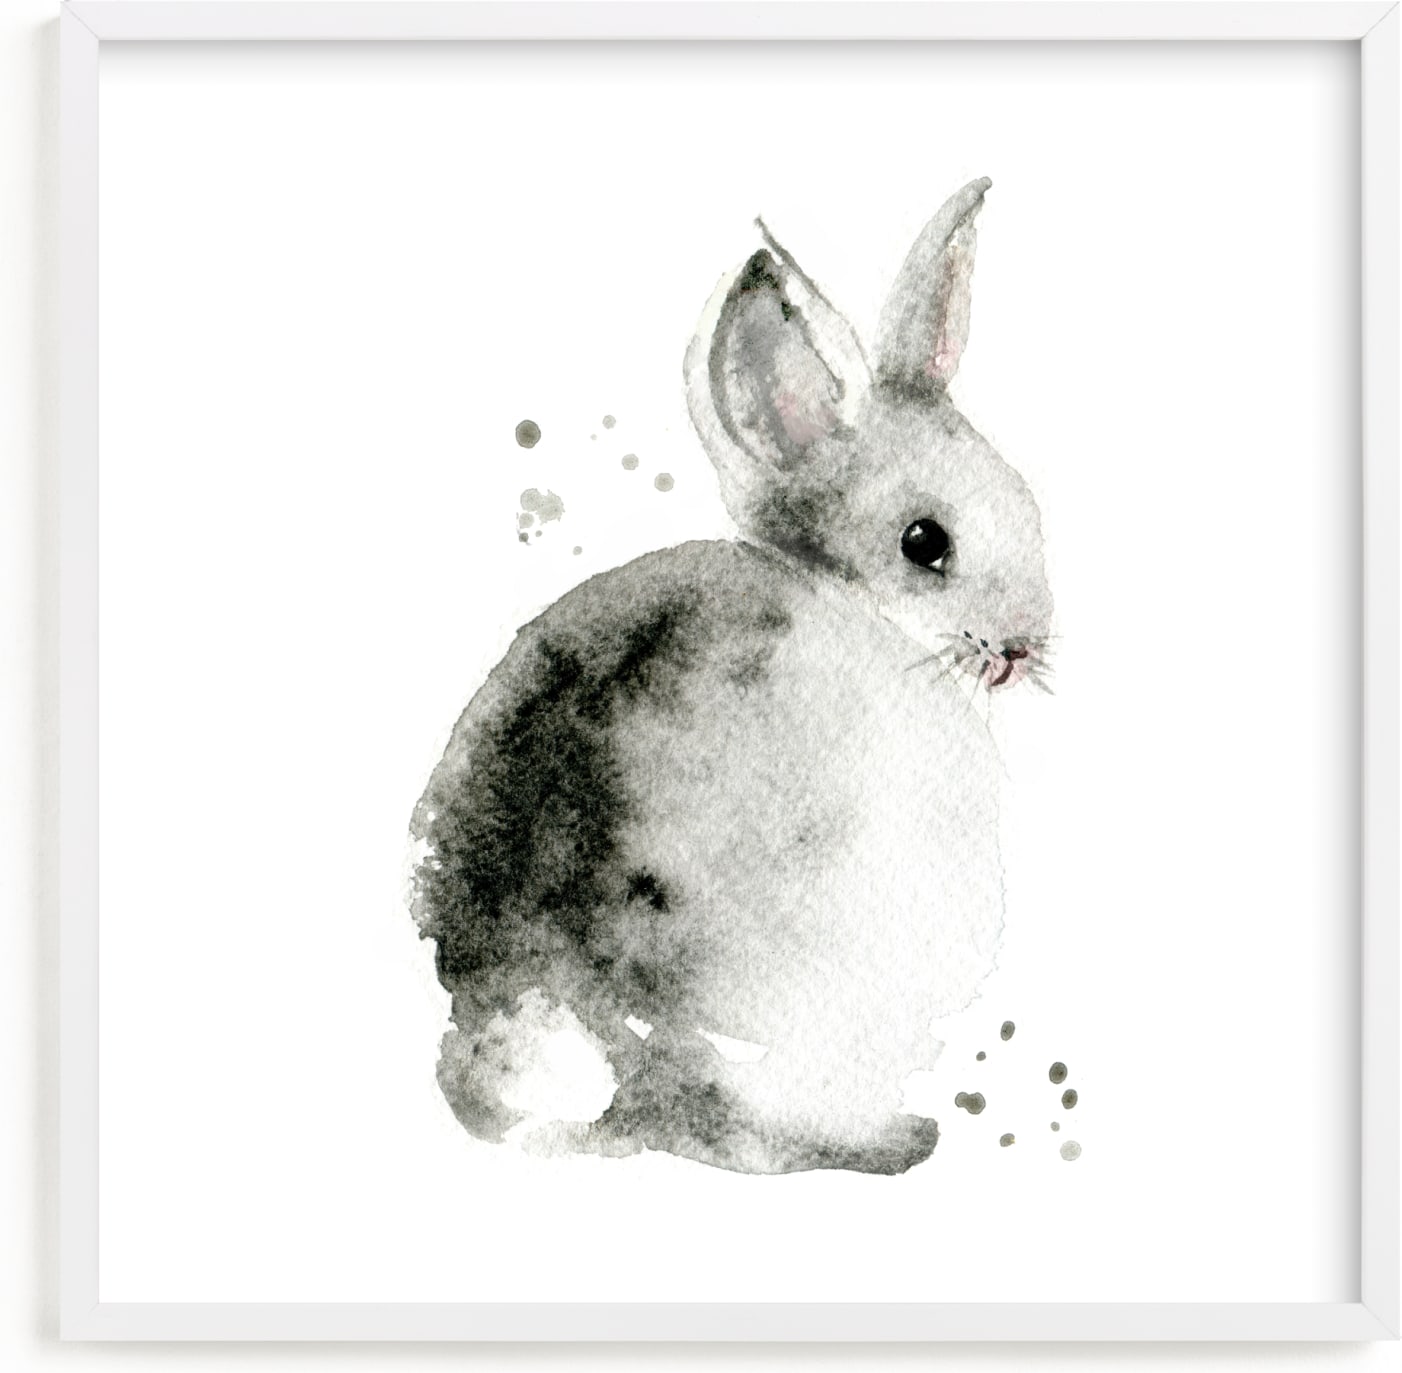 This is a white art by Lulaloo called Bunny2.